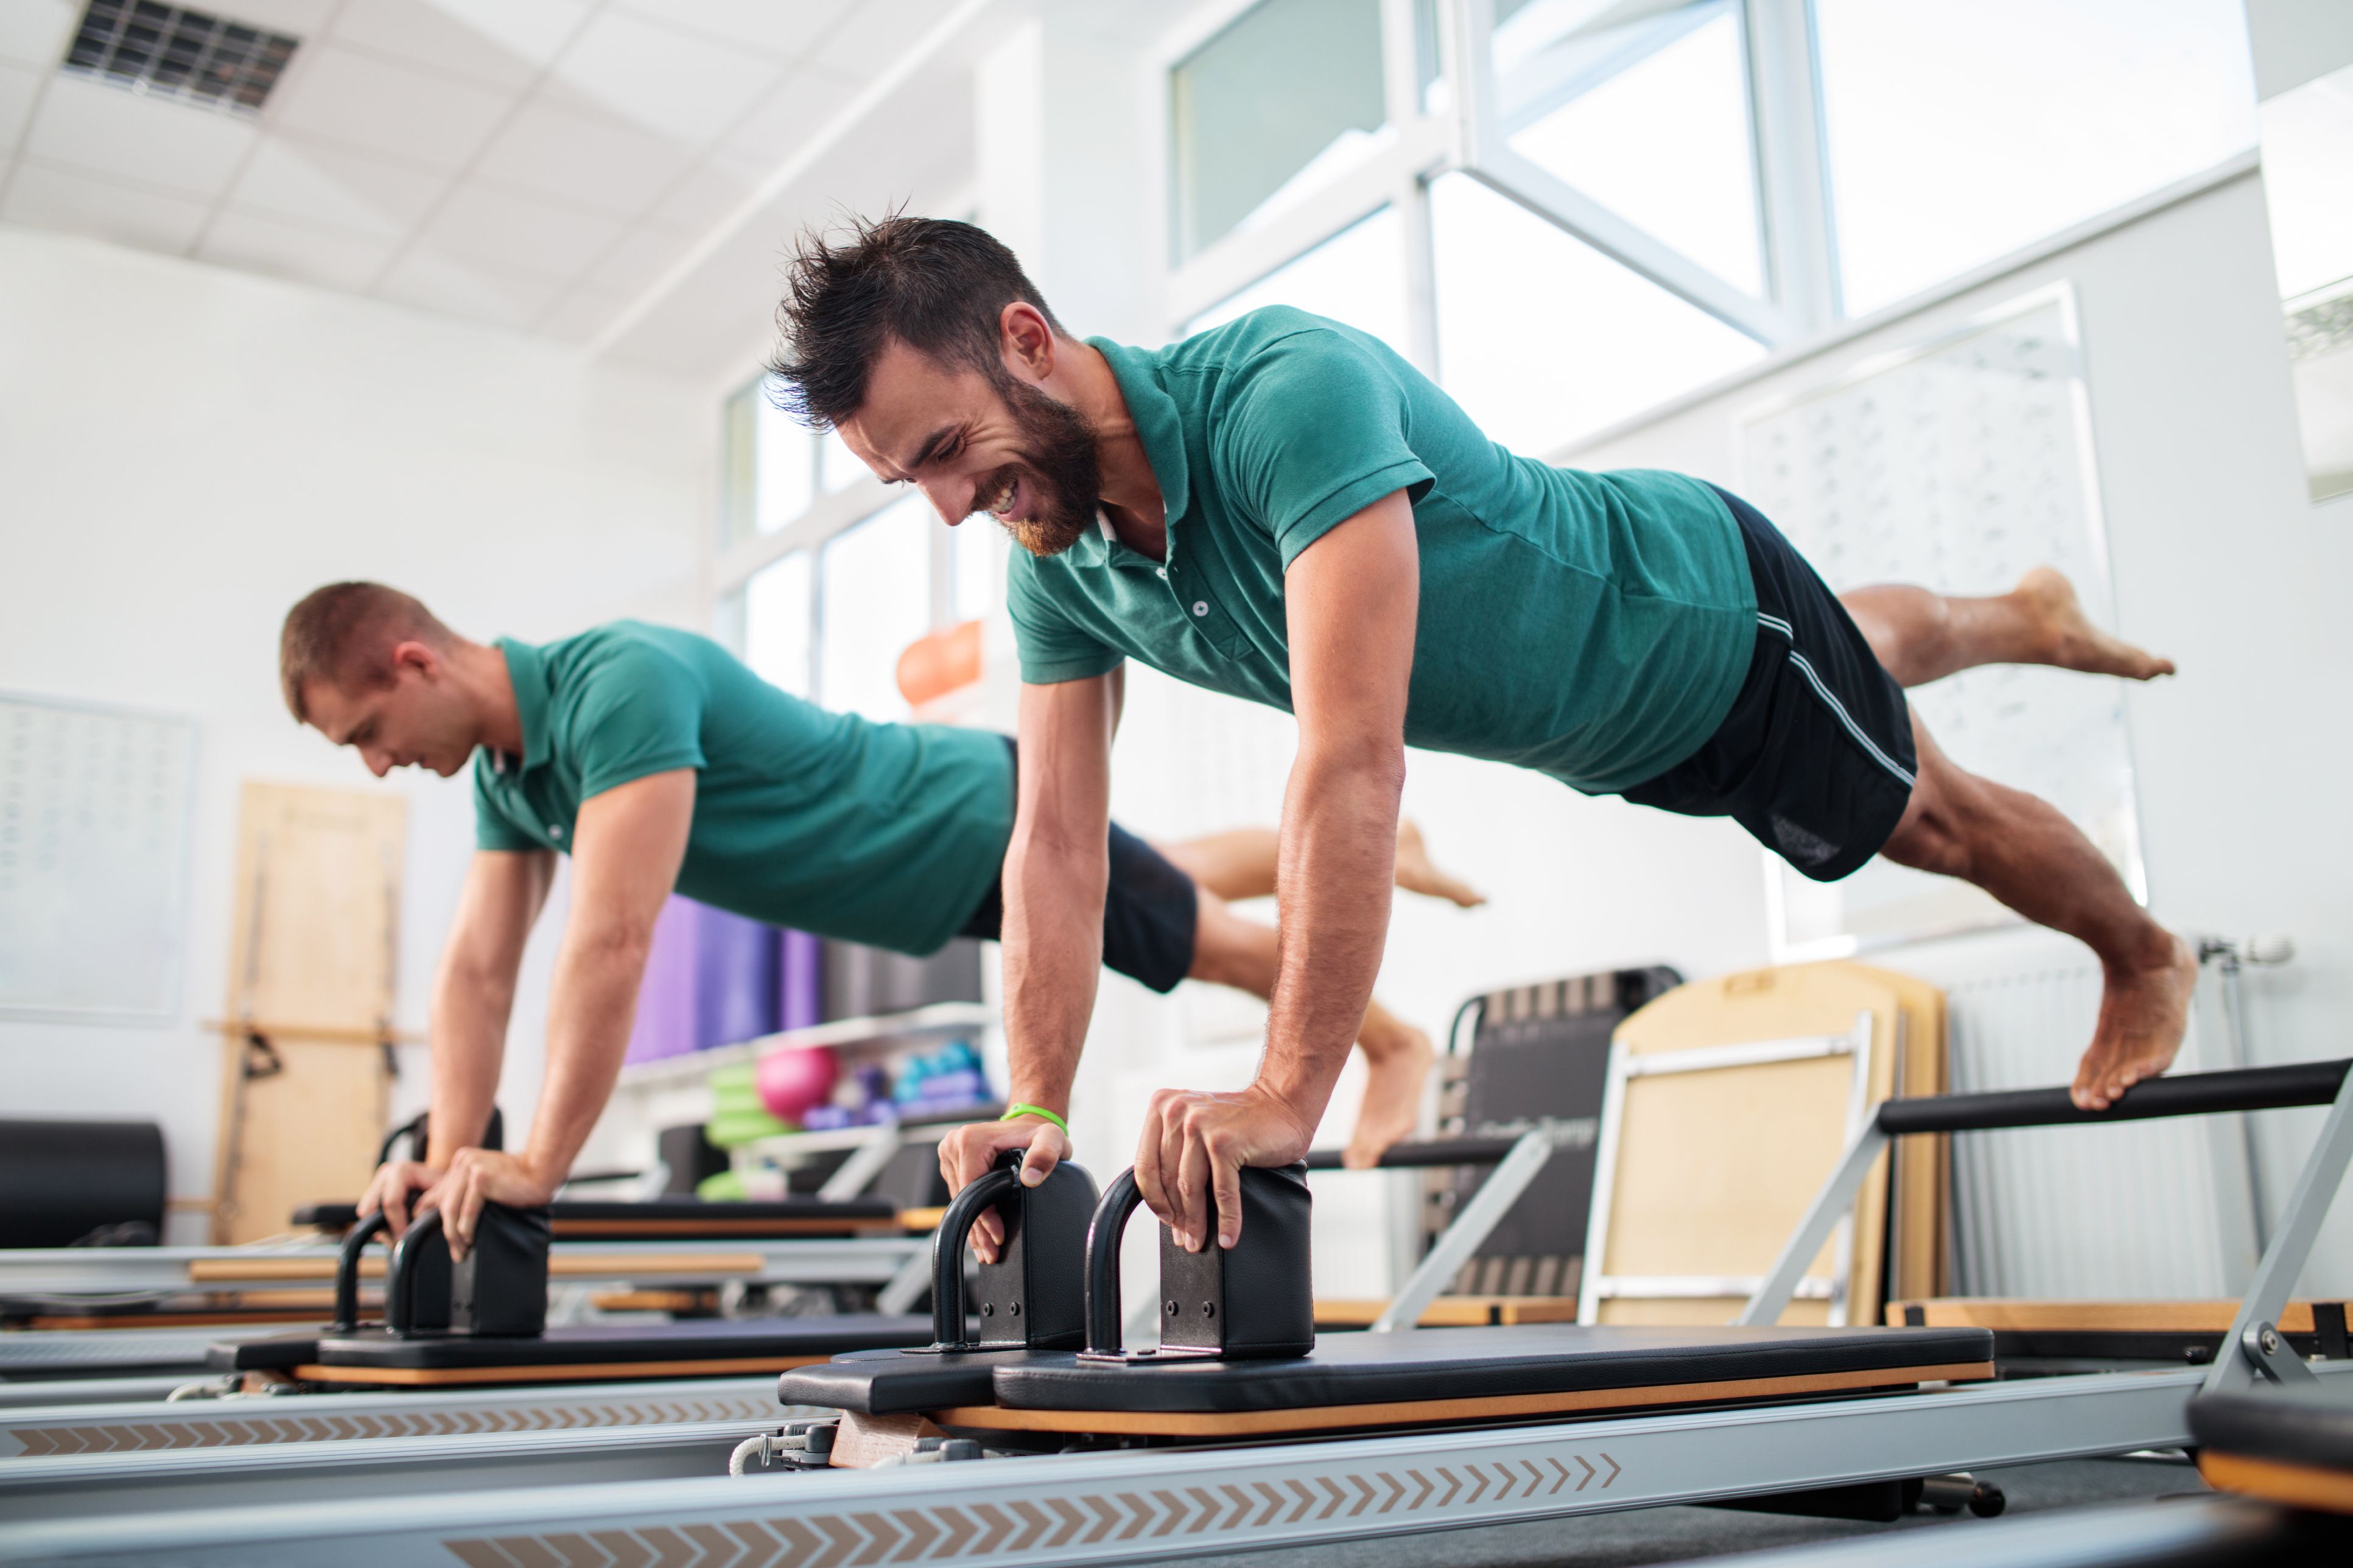 Pilates for Men: The Benefits and Best Exercises to Start With